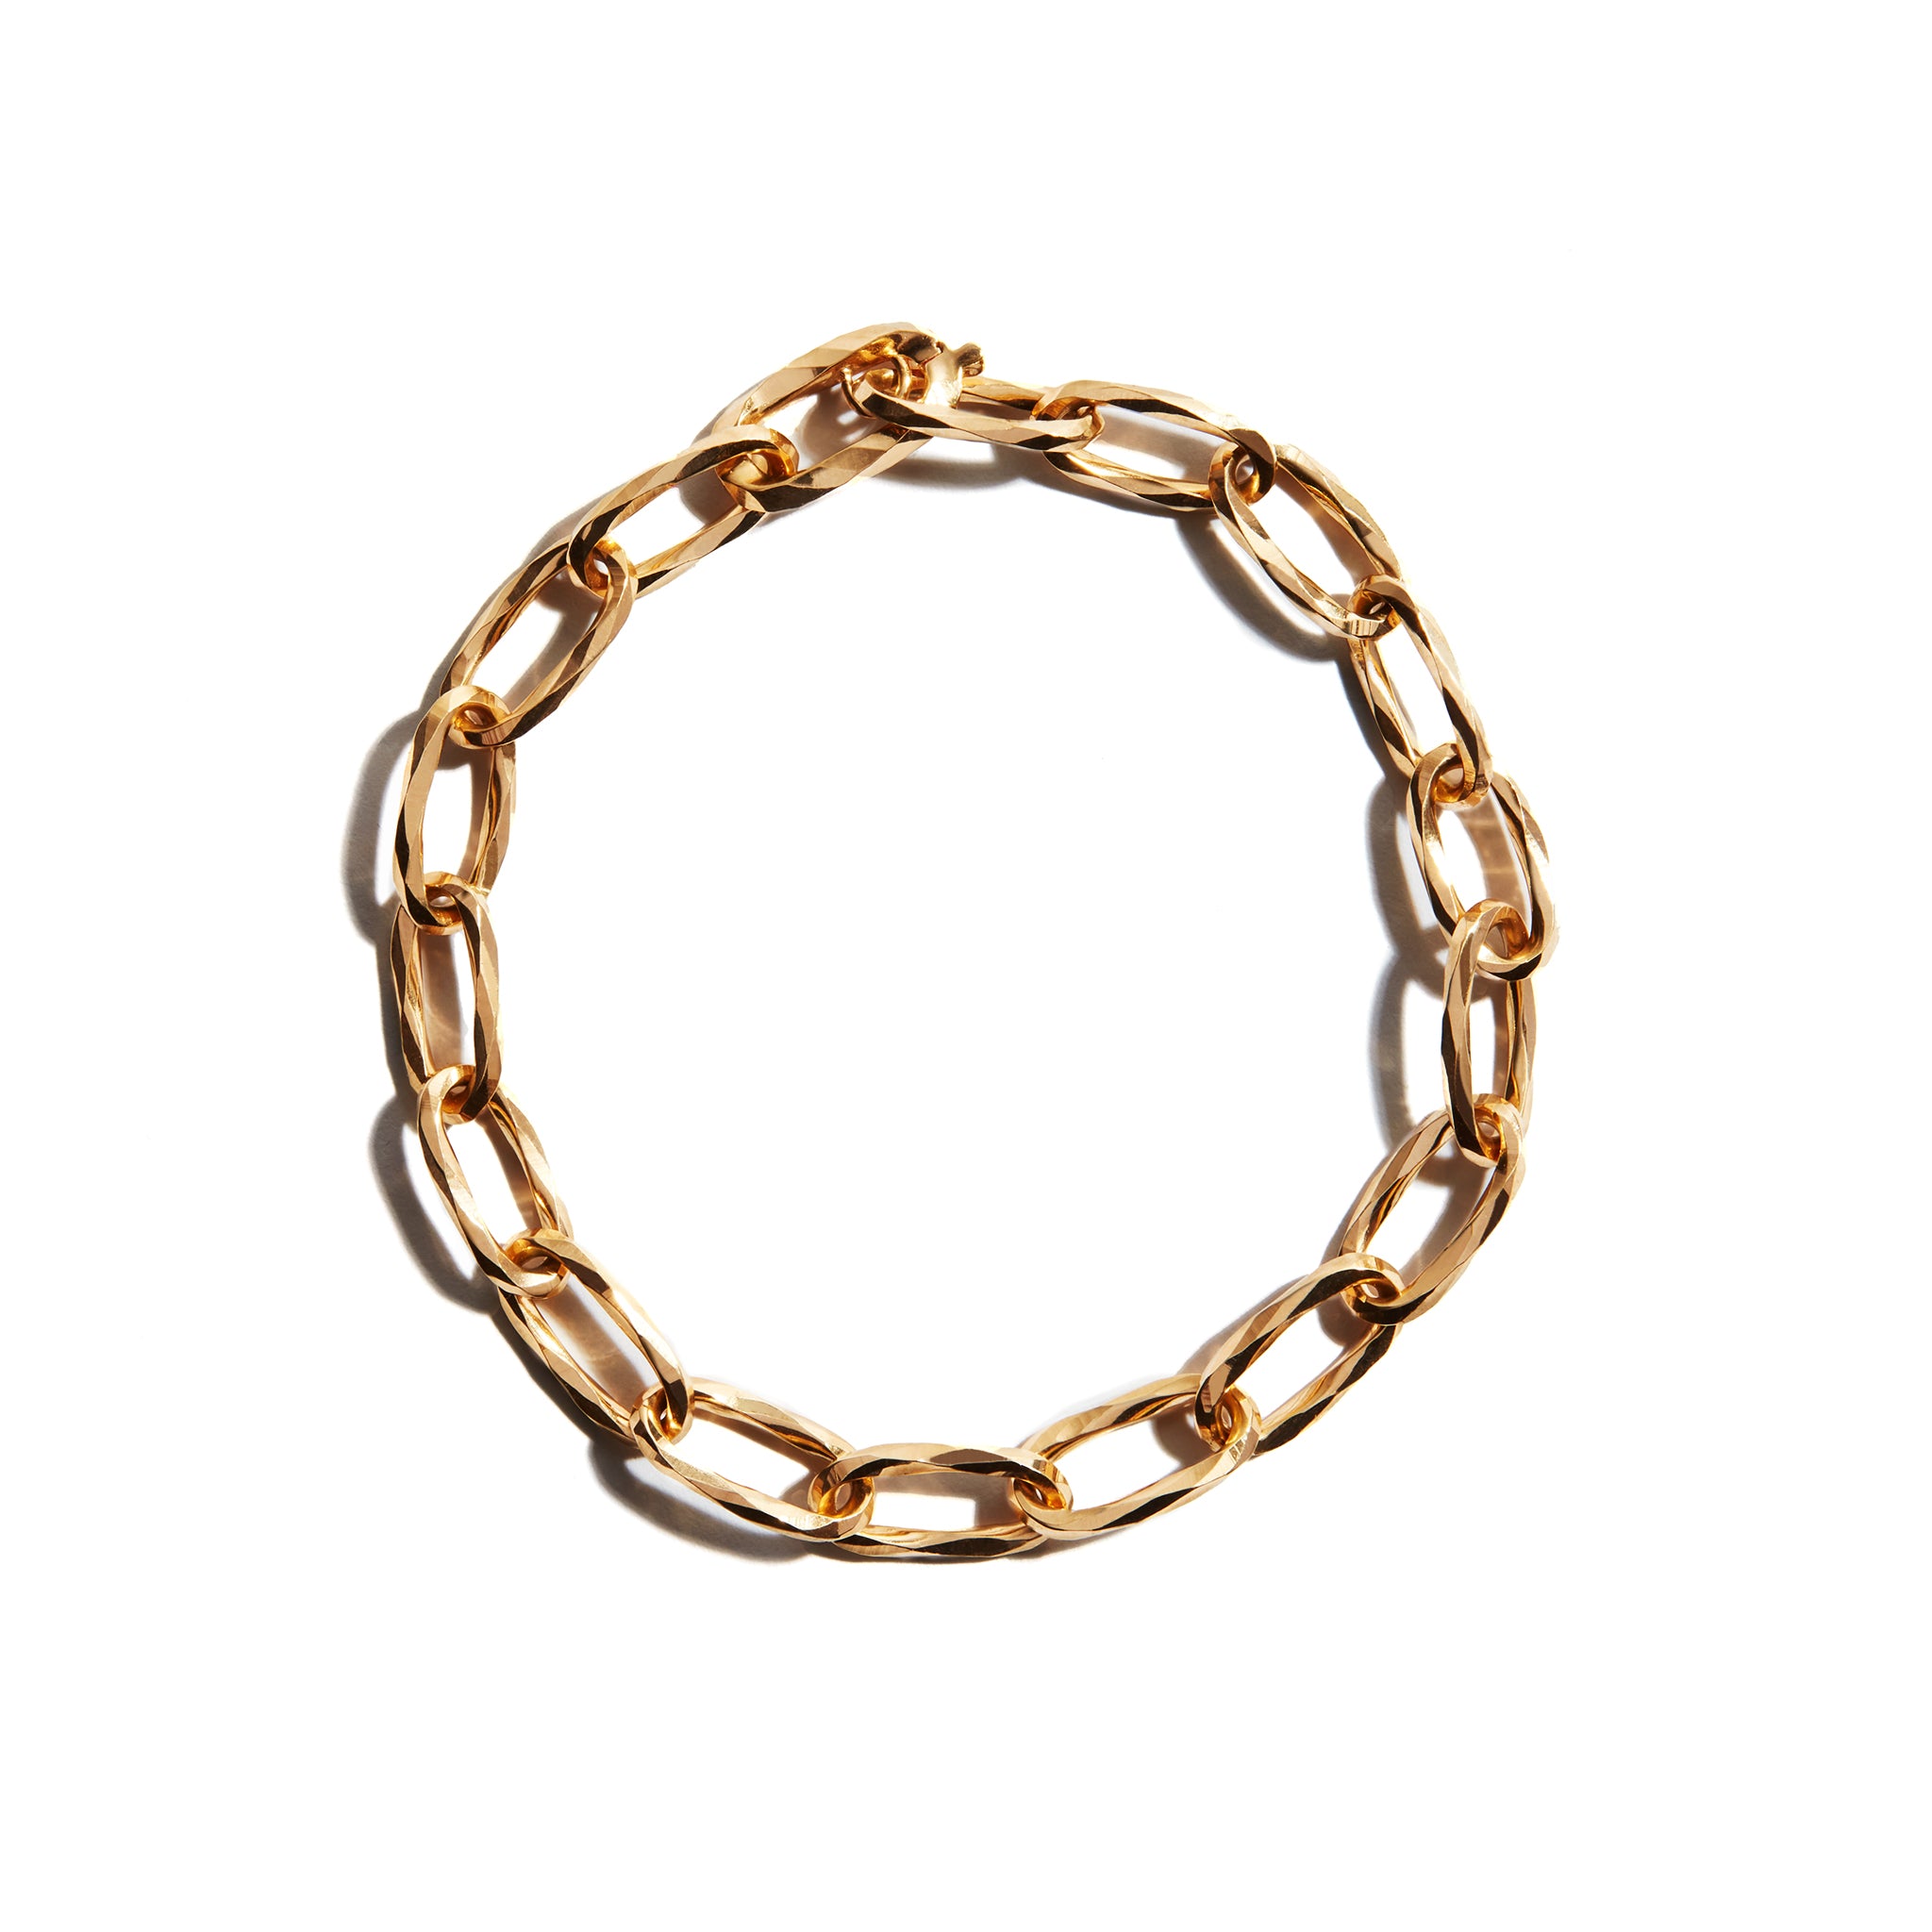 A stylish gold thick link bracelet made from 9 Carat Gold, perfect for adding a touch of Glamour to any outfit.